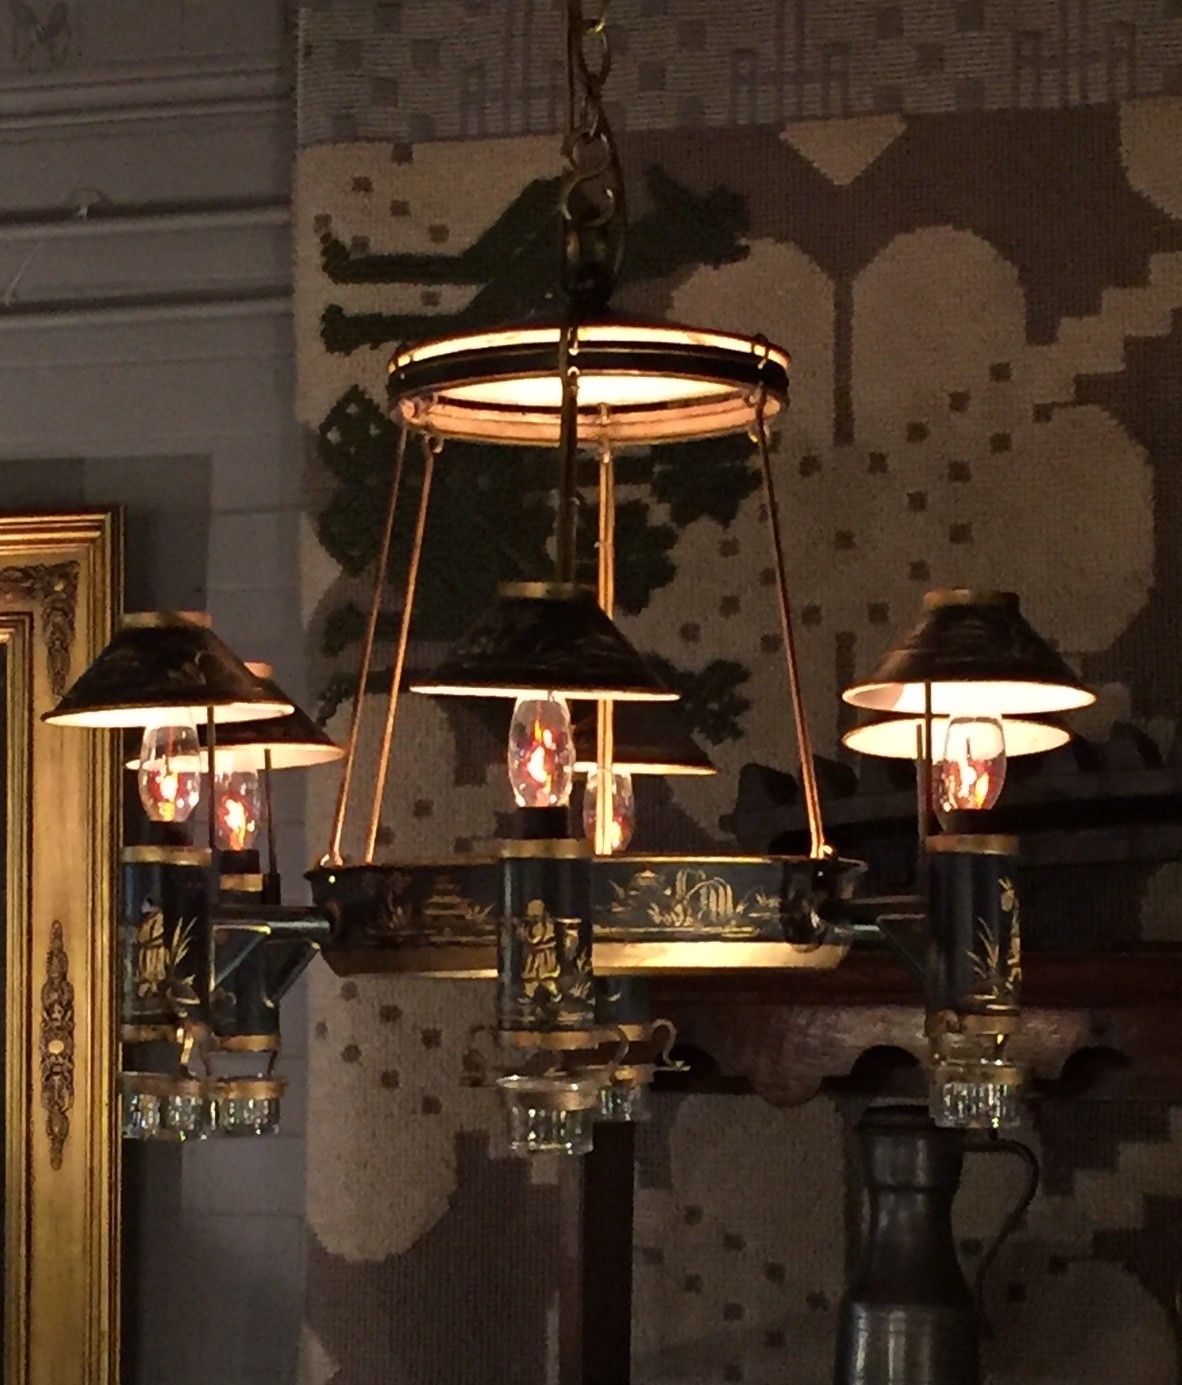 Early 19th Century French Chinoiserie Painted Toleware Chandelier Regarding Chinoiserie Chandeliers (View 6 of 25)